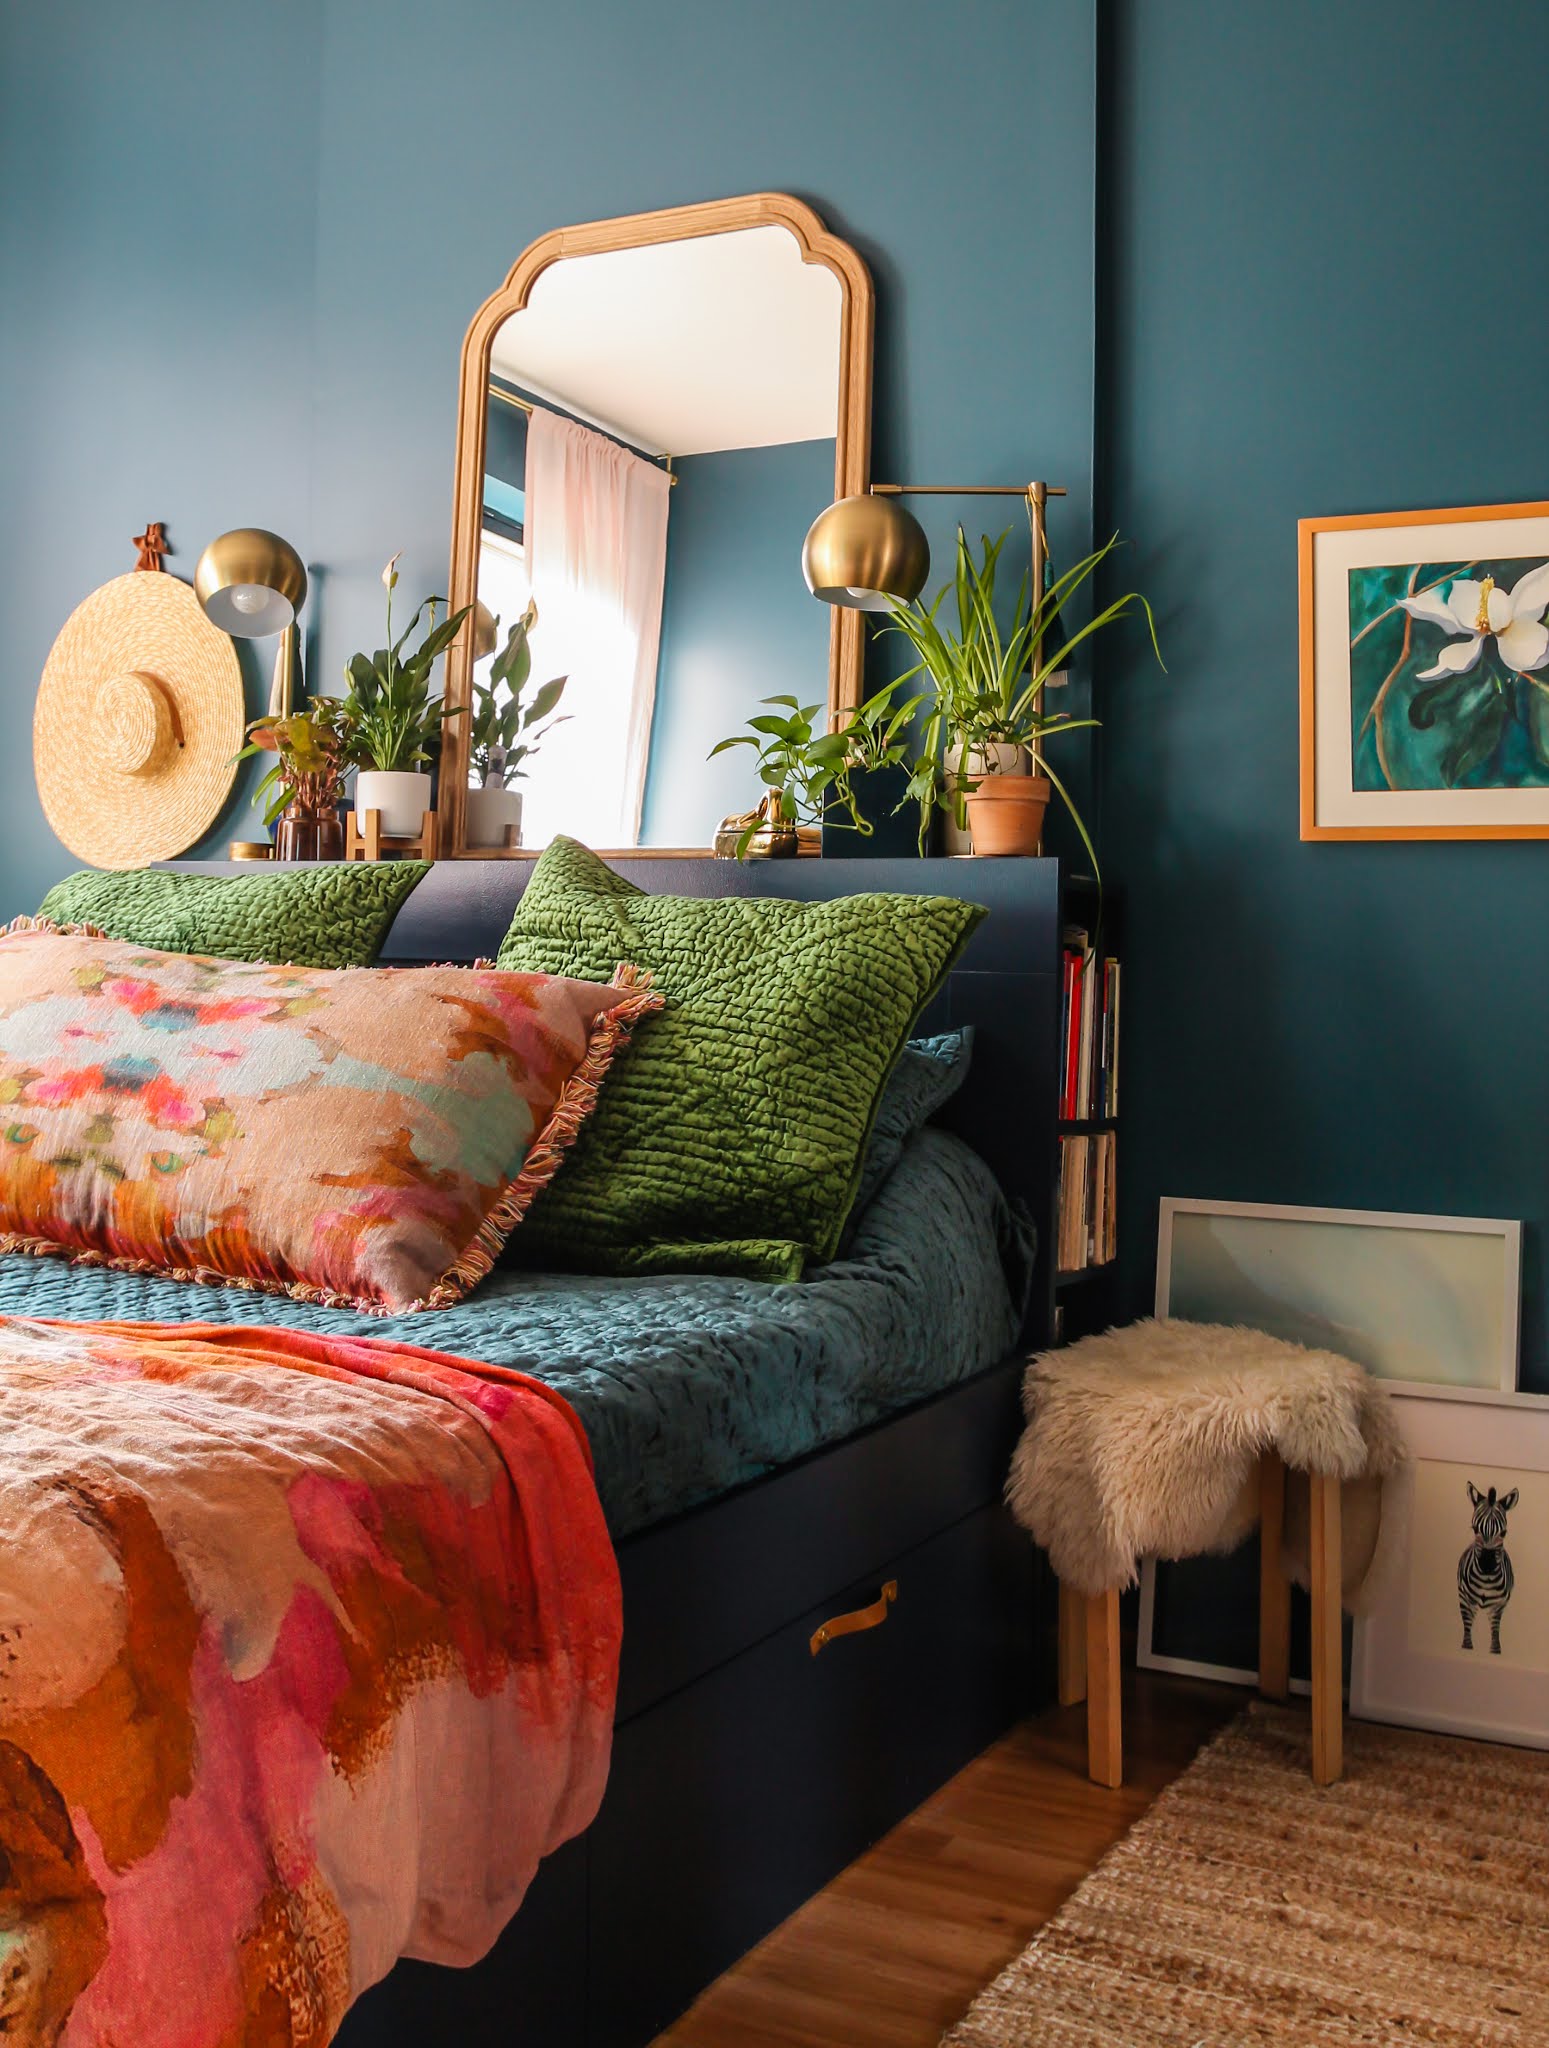 Give Your Bedroom An Instant Upgrade With Lush Textures and Bright ...